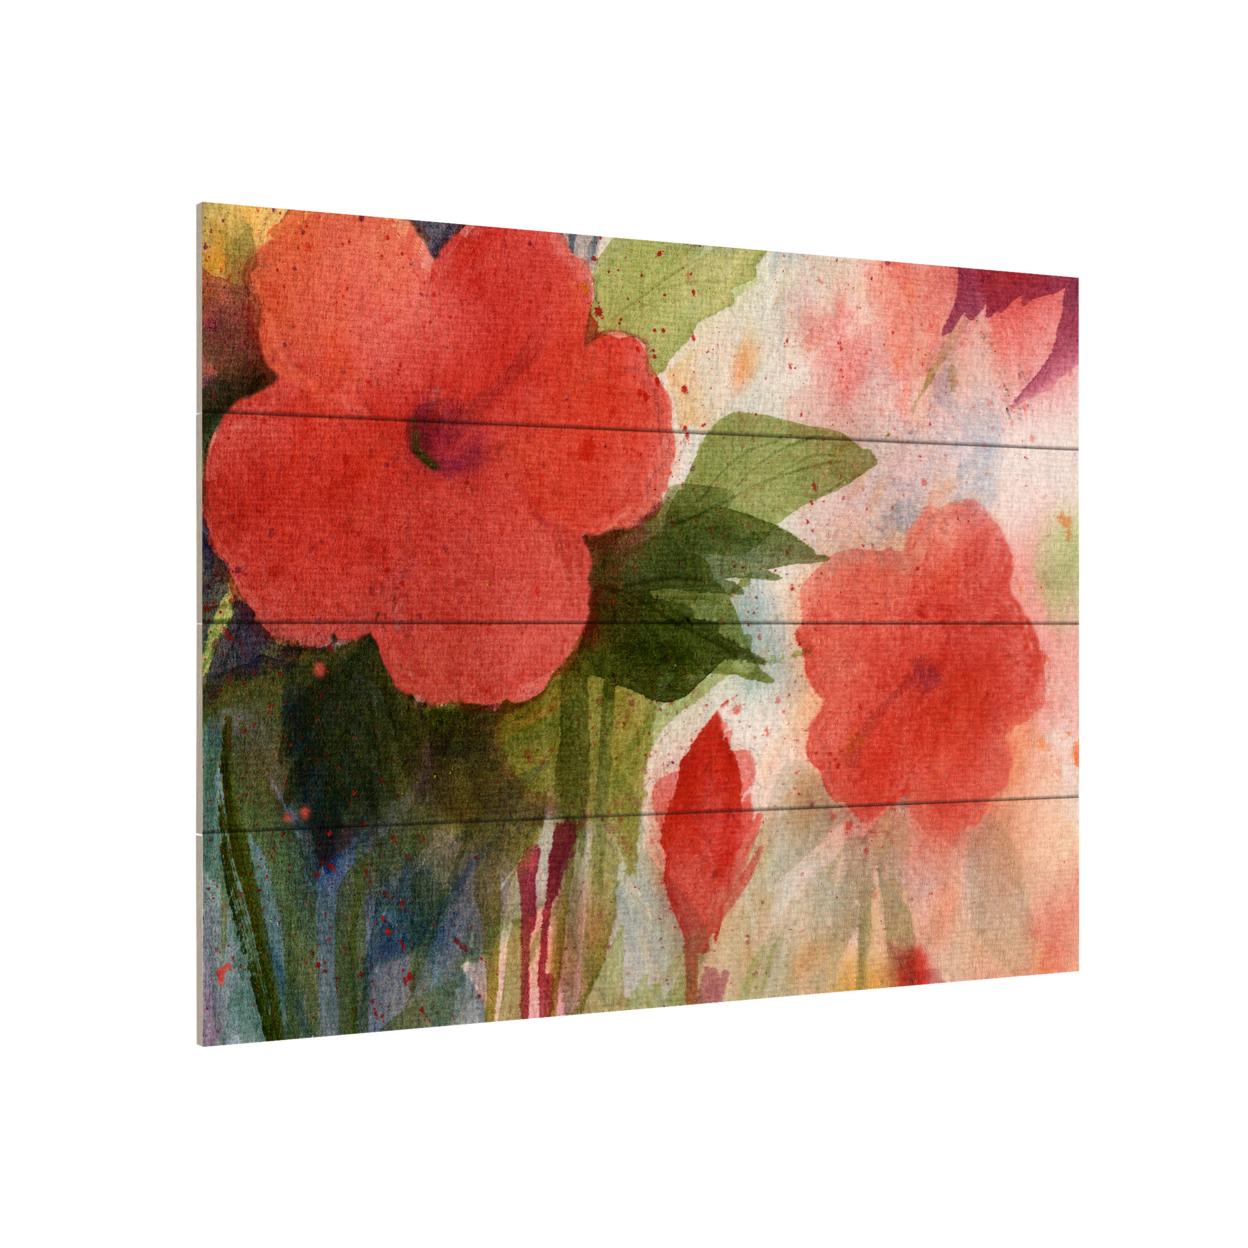 Wall Art 12 X 16 Inches Titled Red Blossoms Ready To Hang Printed On Wooden Planks